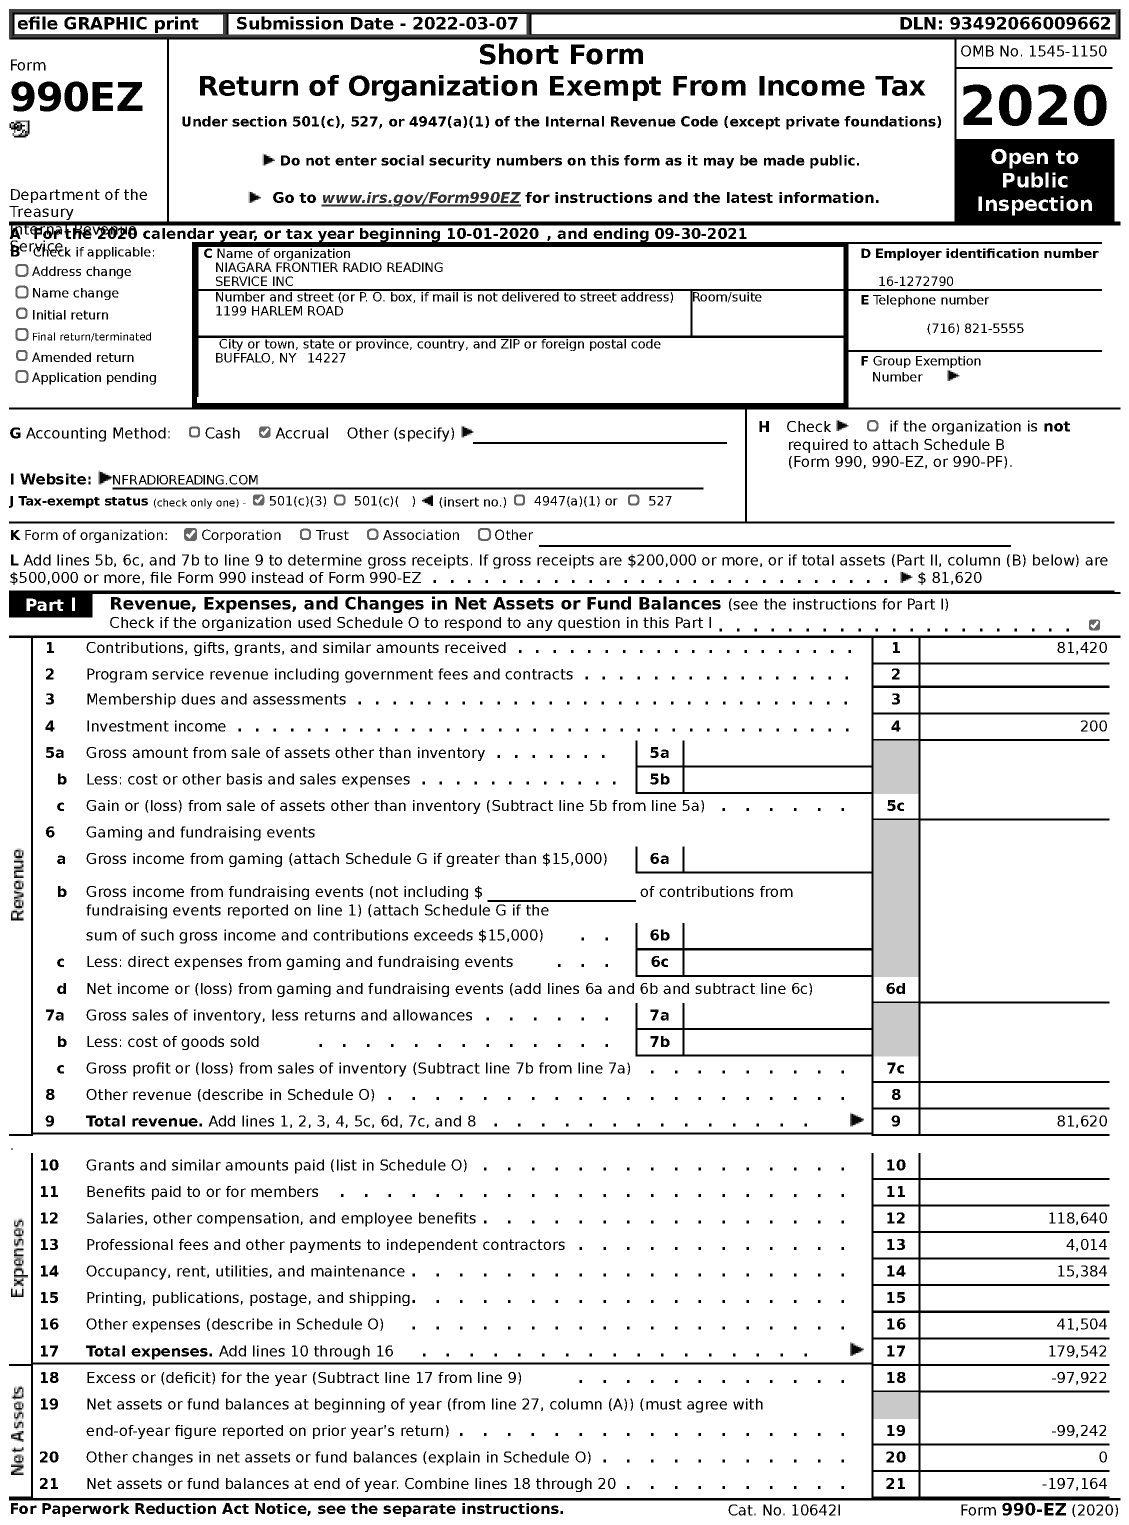 Image of first page of 2020 Form 990EZ for Niagara Frontier Radio Reading Service